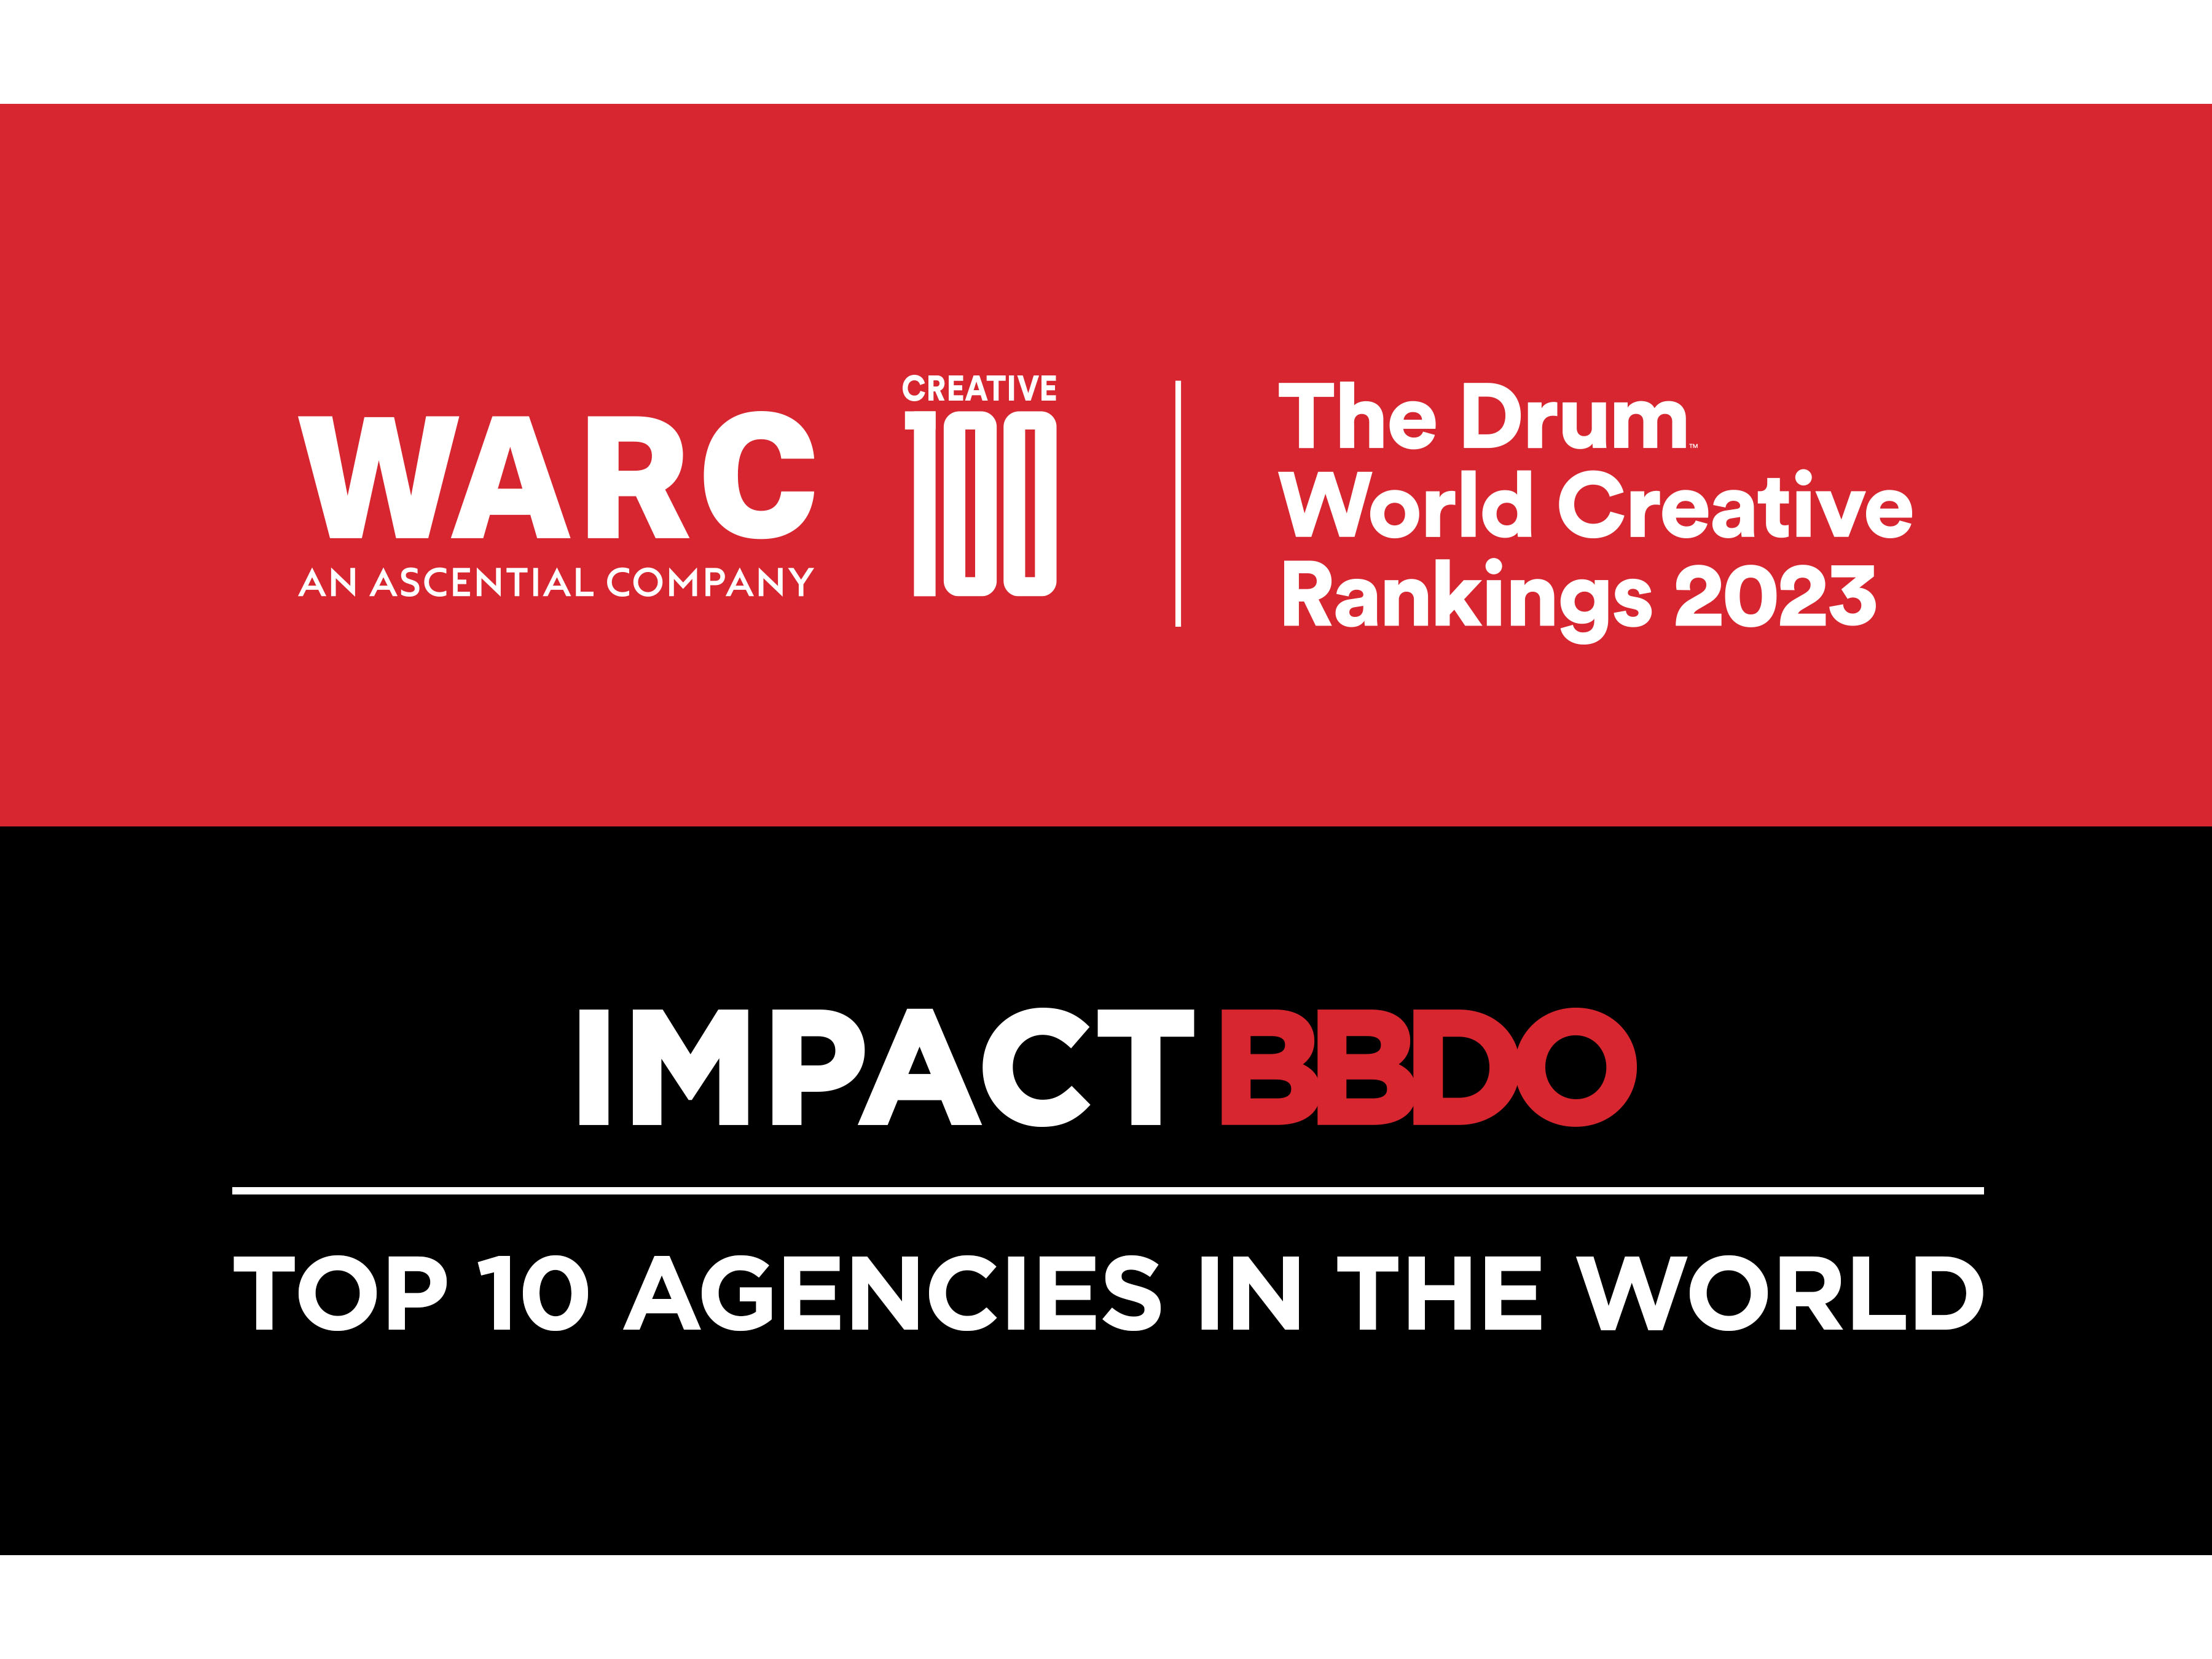 IMPACT BBDO first MENA agency in the Top 10 globally on both WARC and World Creative Rankings